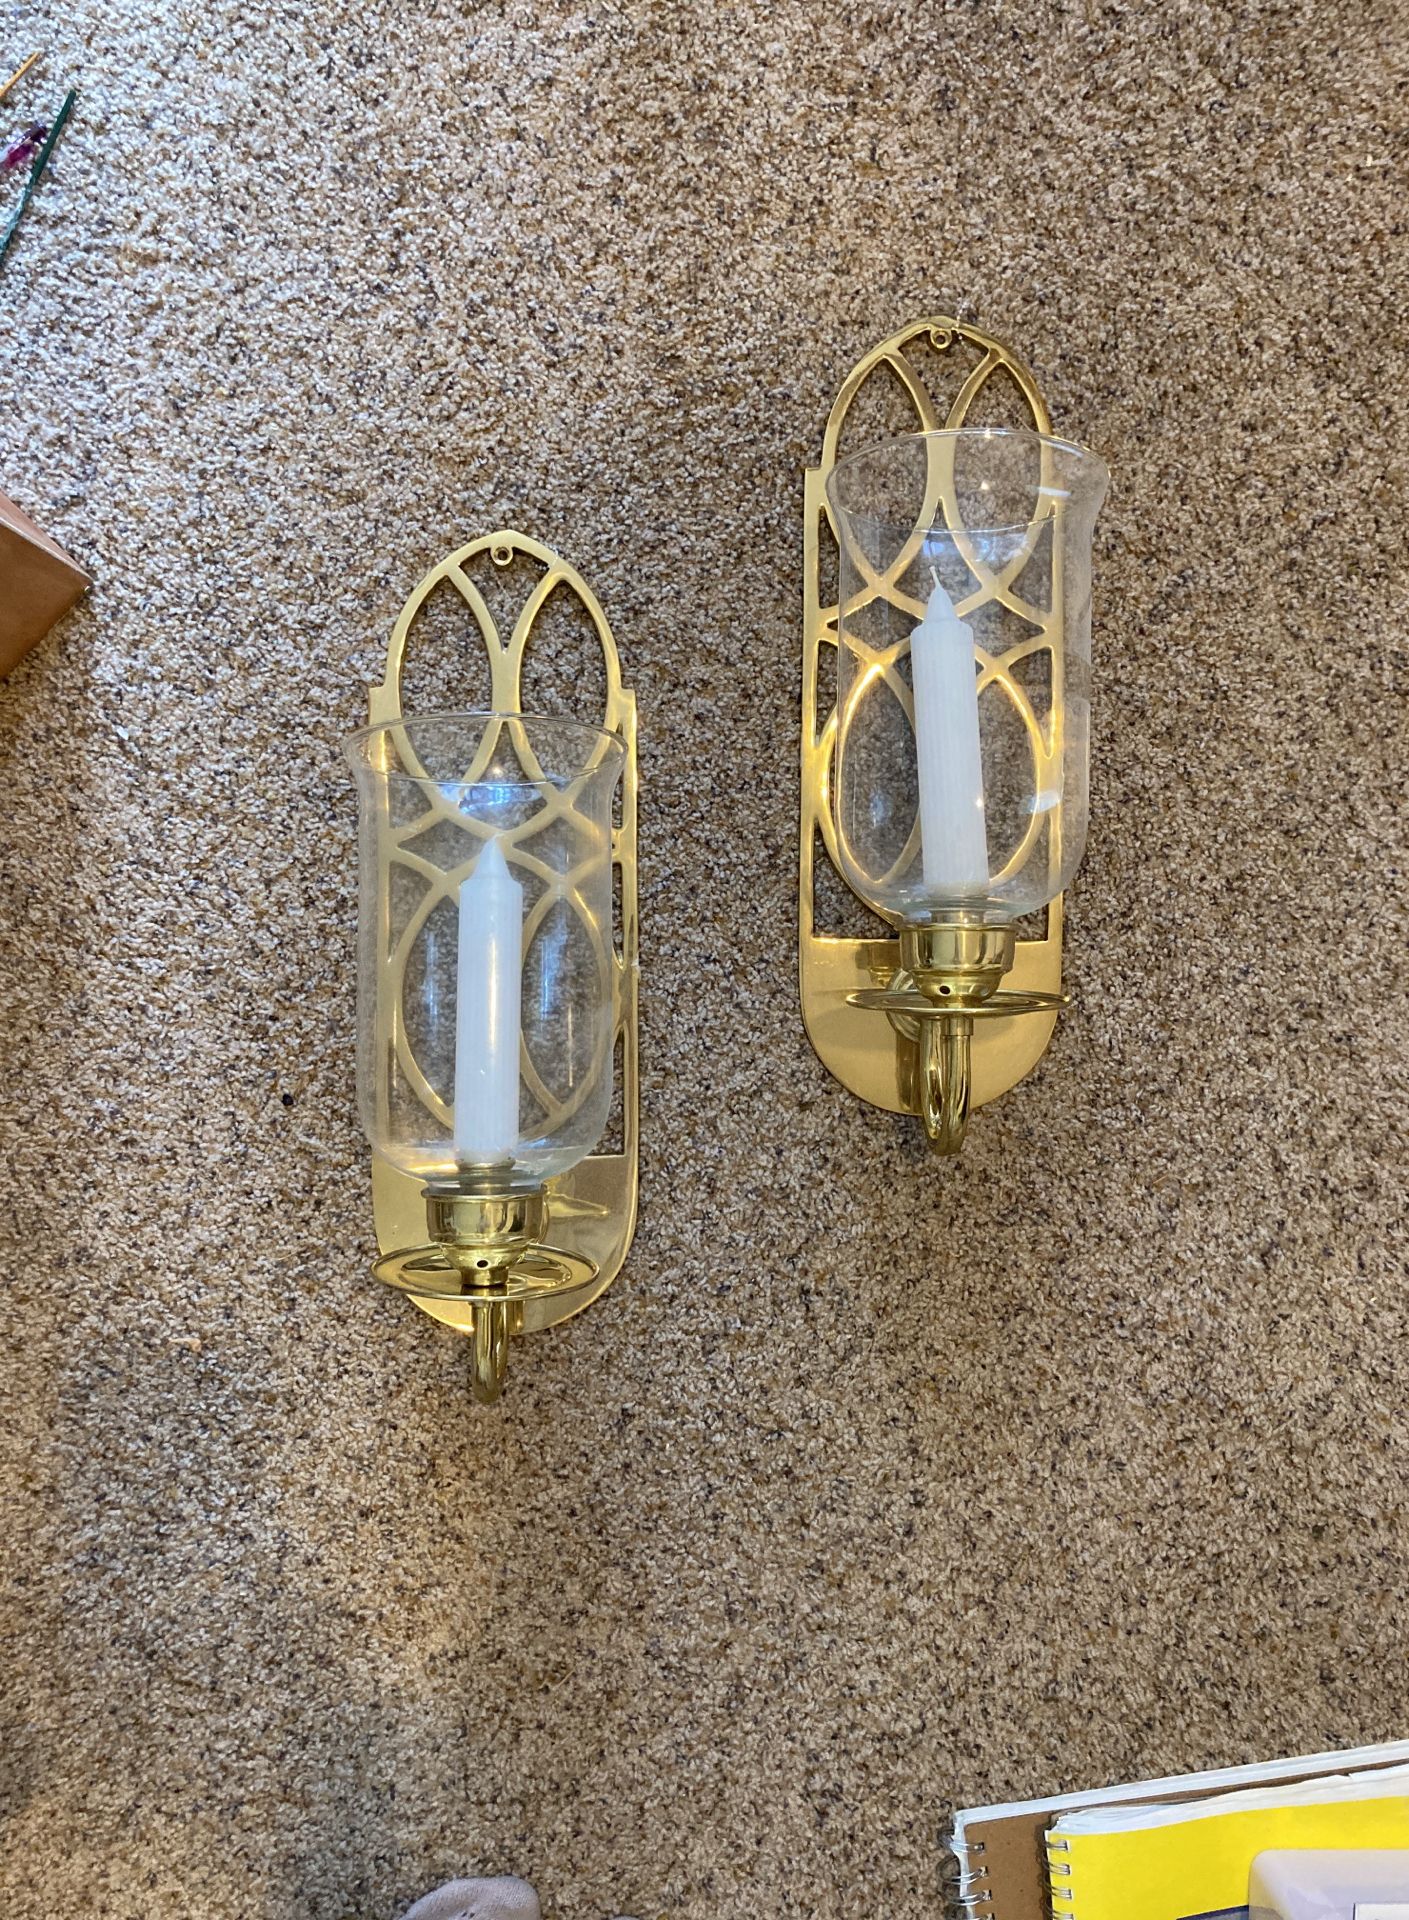 Gold Looking Antique And Vintage Inspired Wall Scones Lamps With Candles